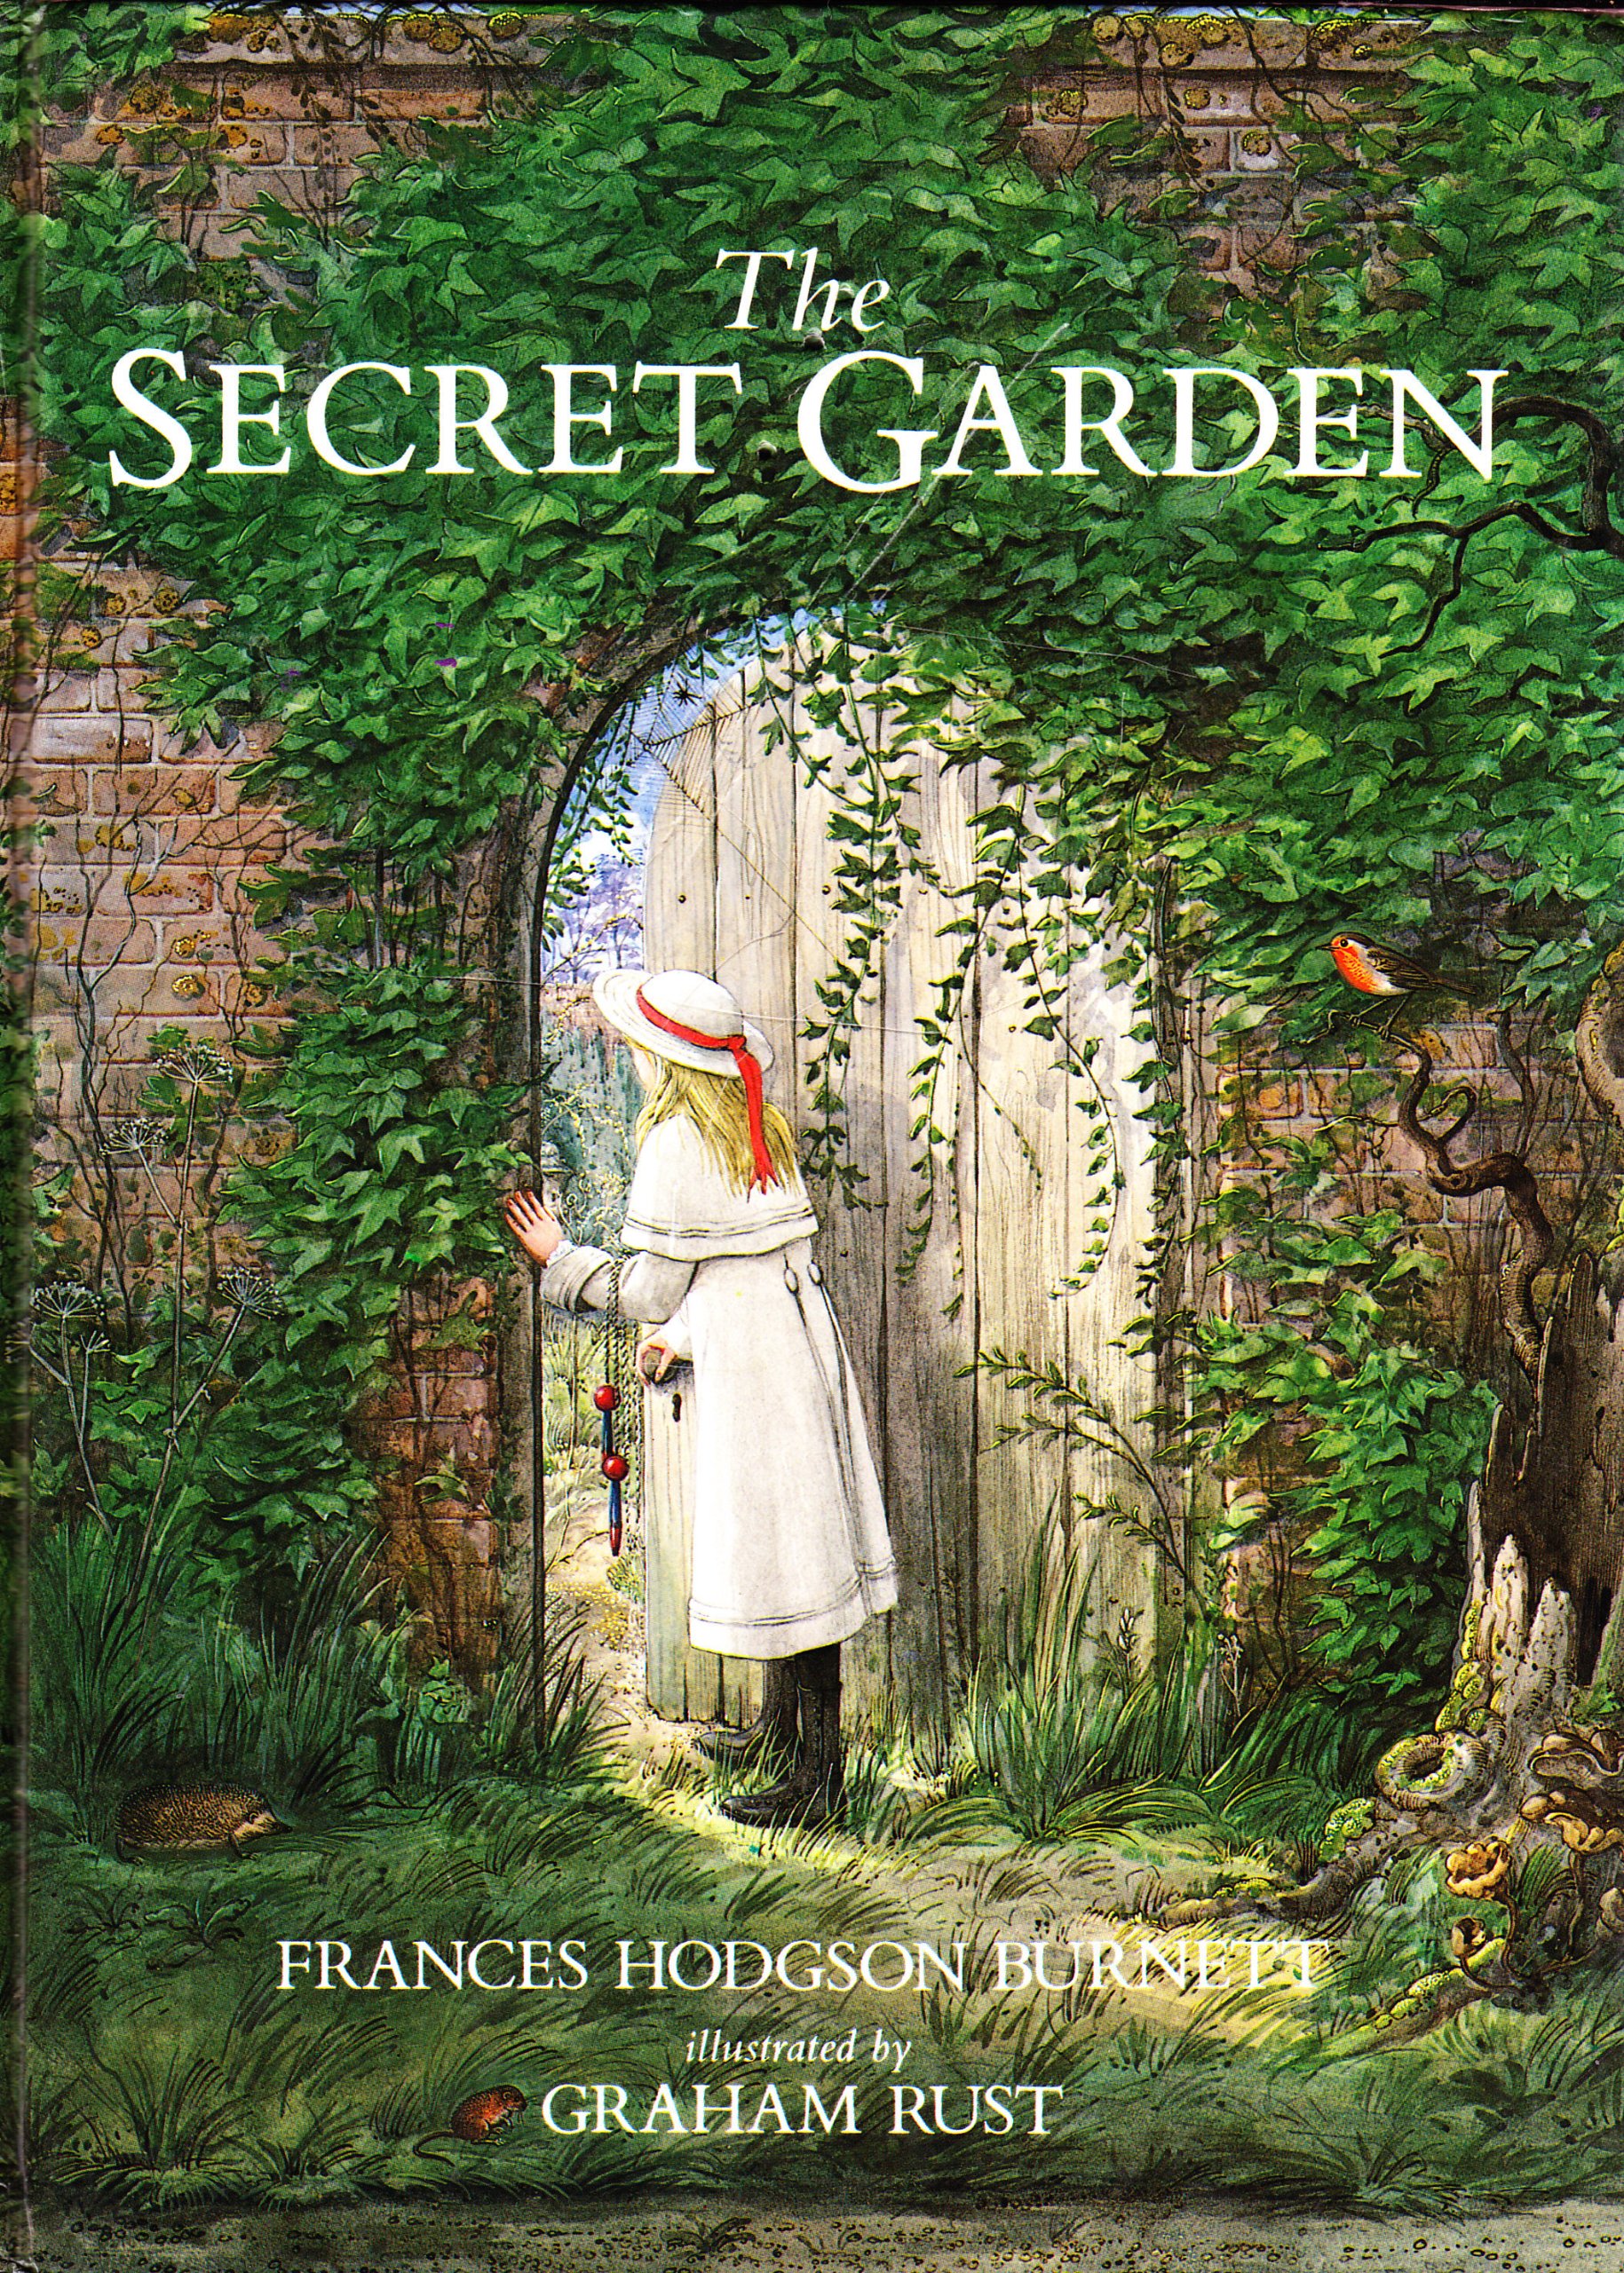 garden story review